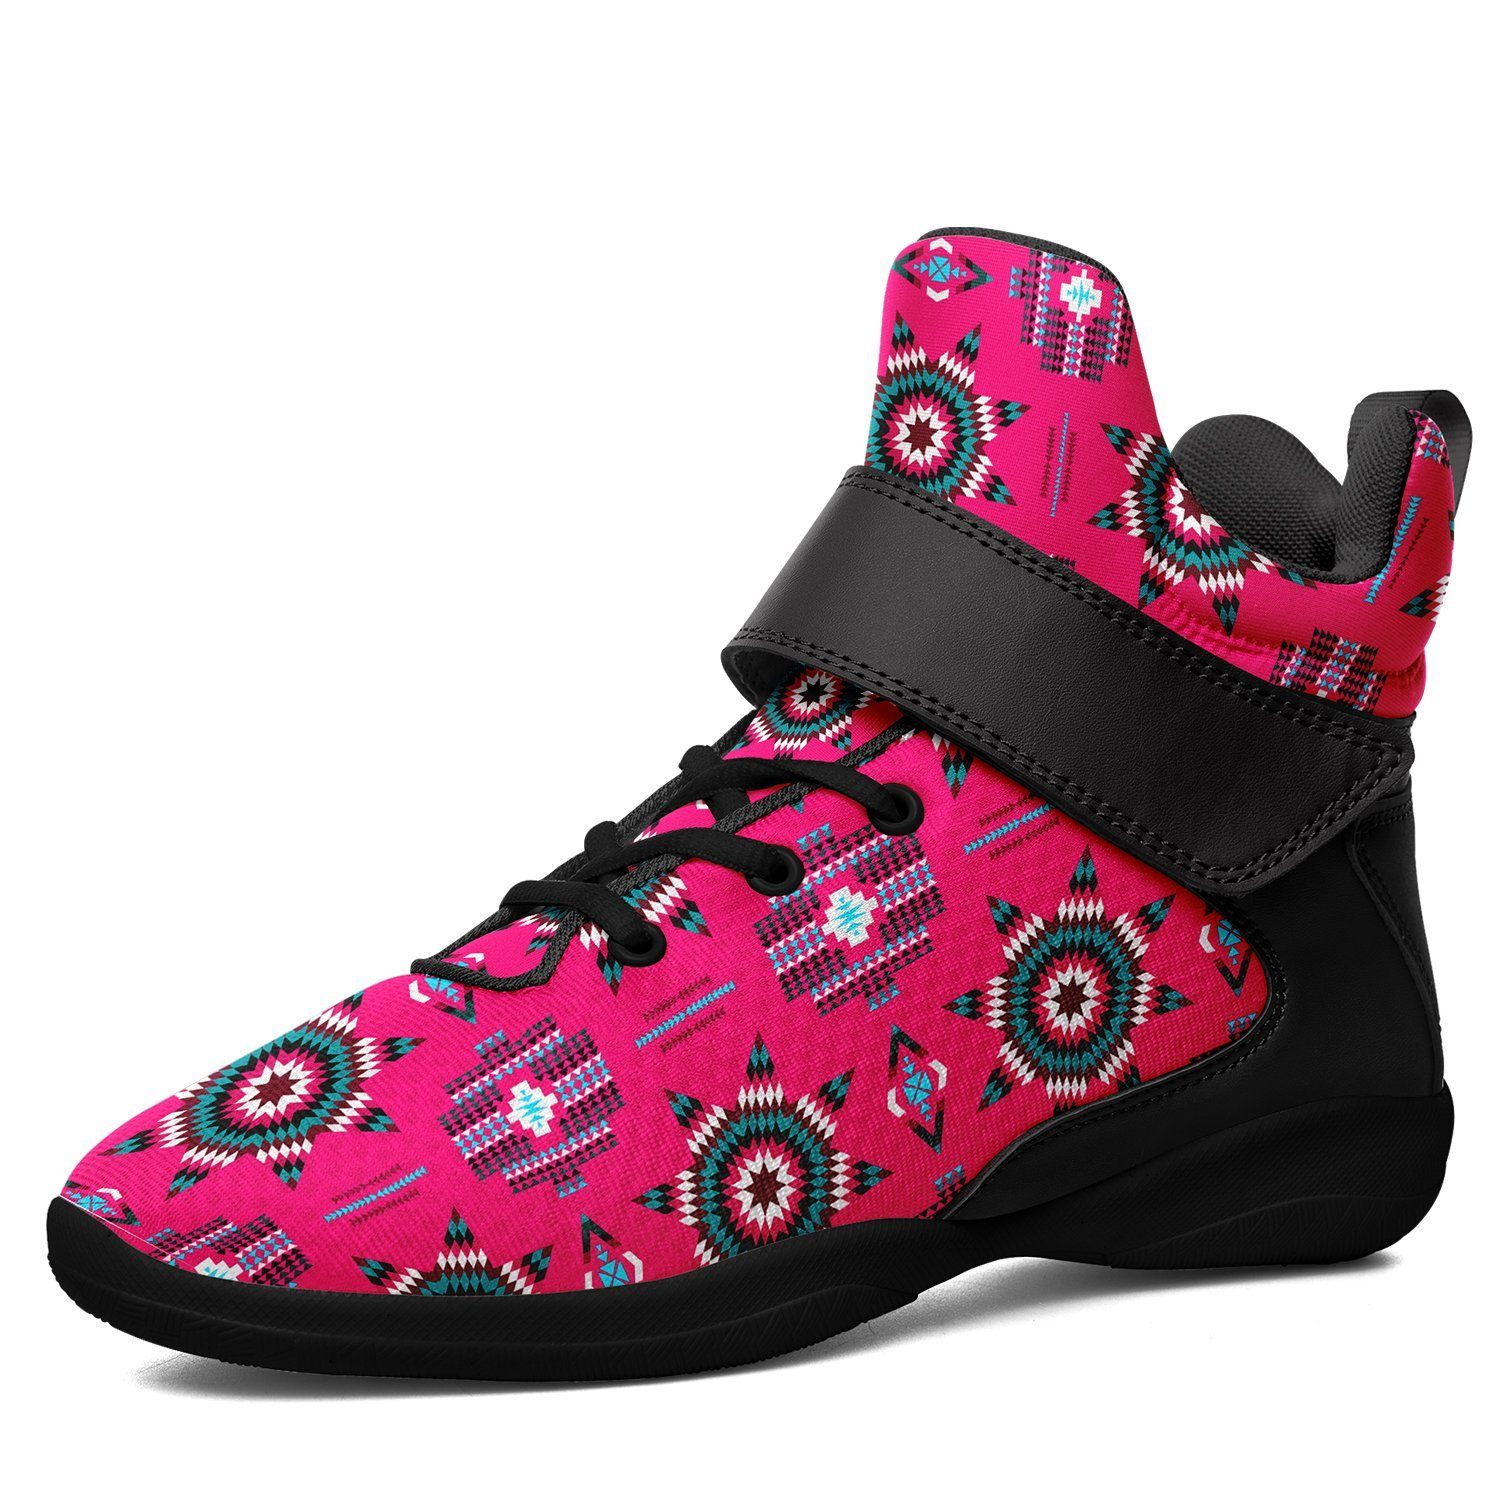 Rising Star Strawberry Moon Ipottaa Basketball / Sport High Top Shoes - Black Sole 49 Dzine US Men 7 / EUR 40 Black Sole with Black Strap 